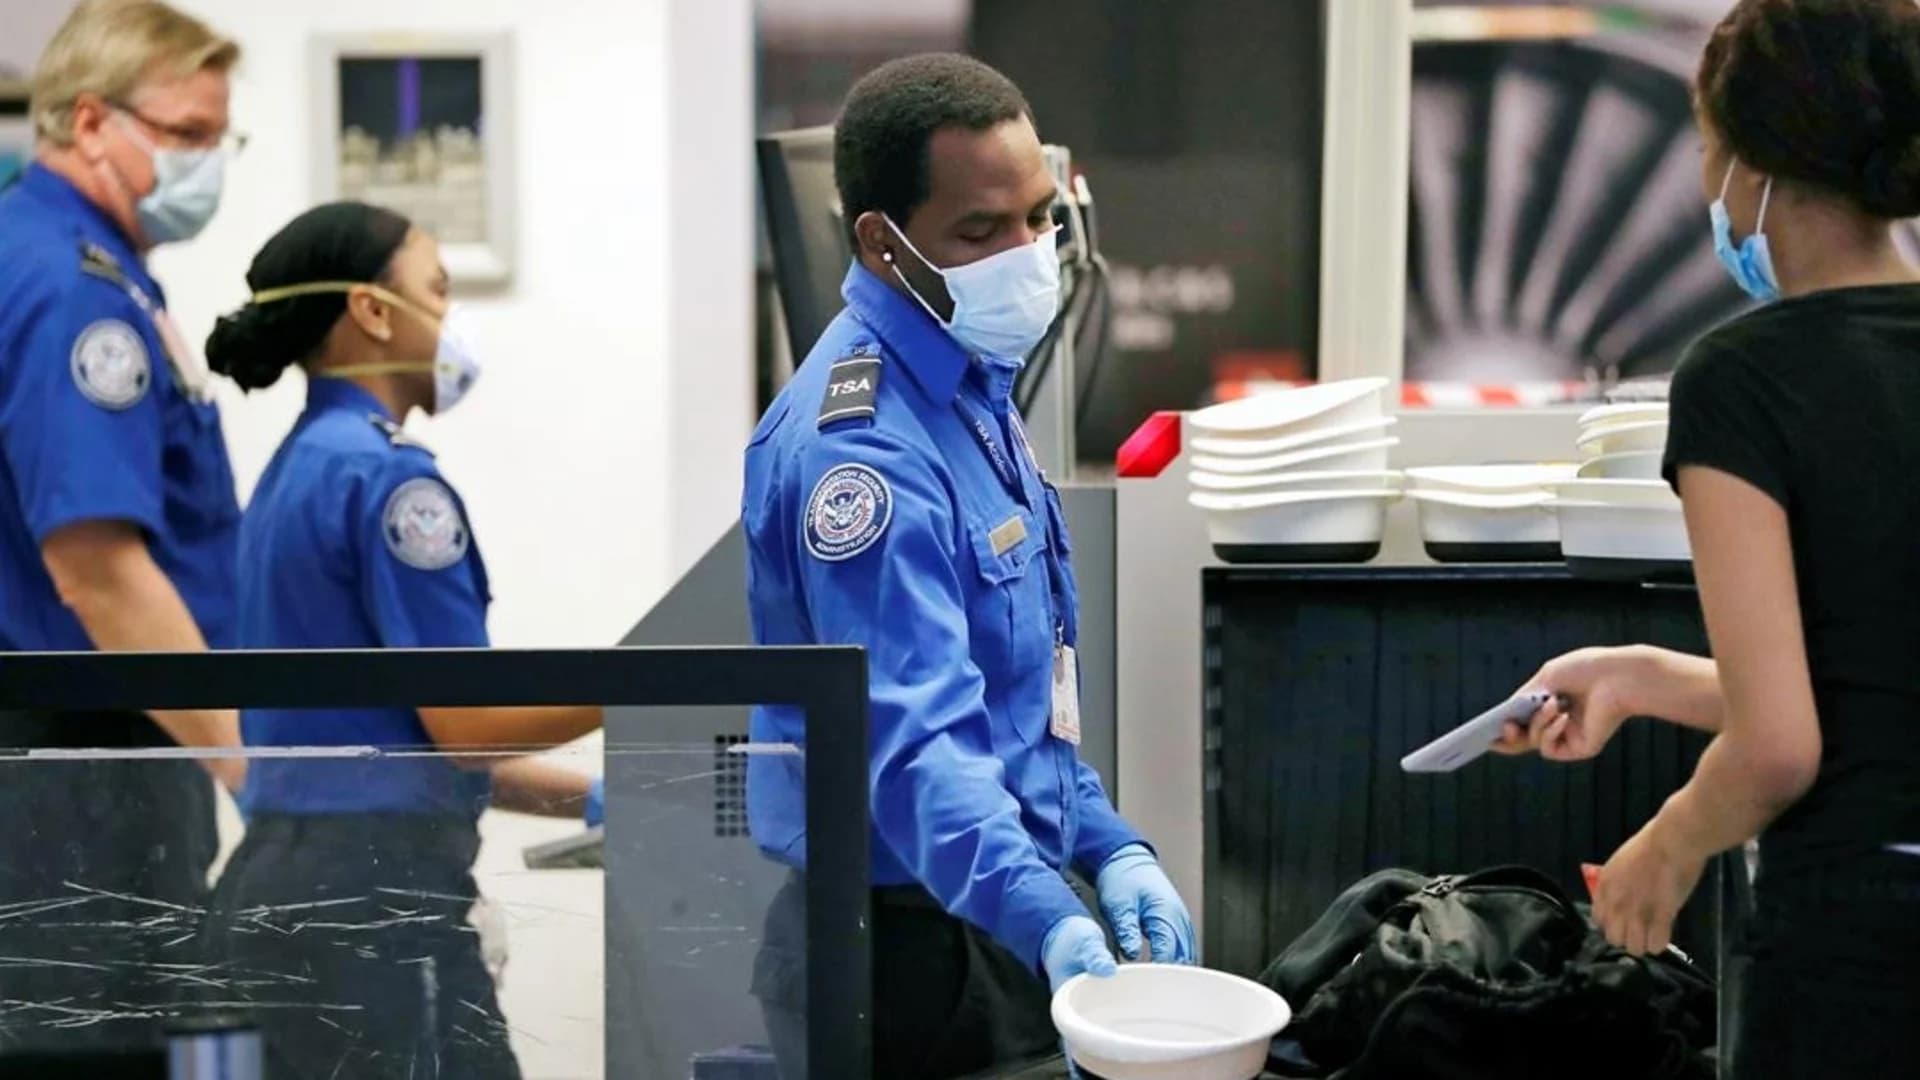 TSA: $926,000 in unclaimed money collected at airport security checkpoints last year